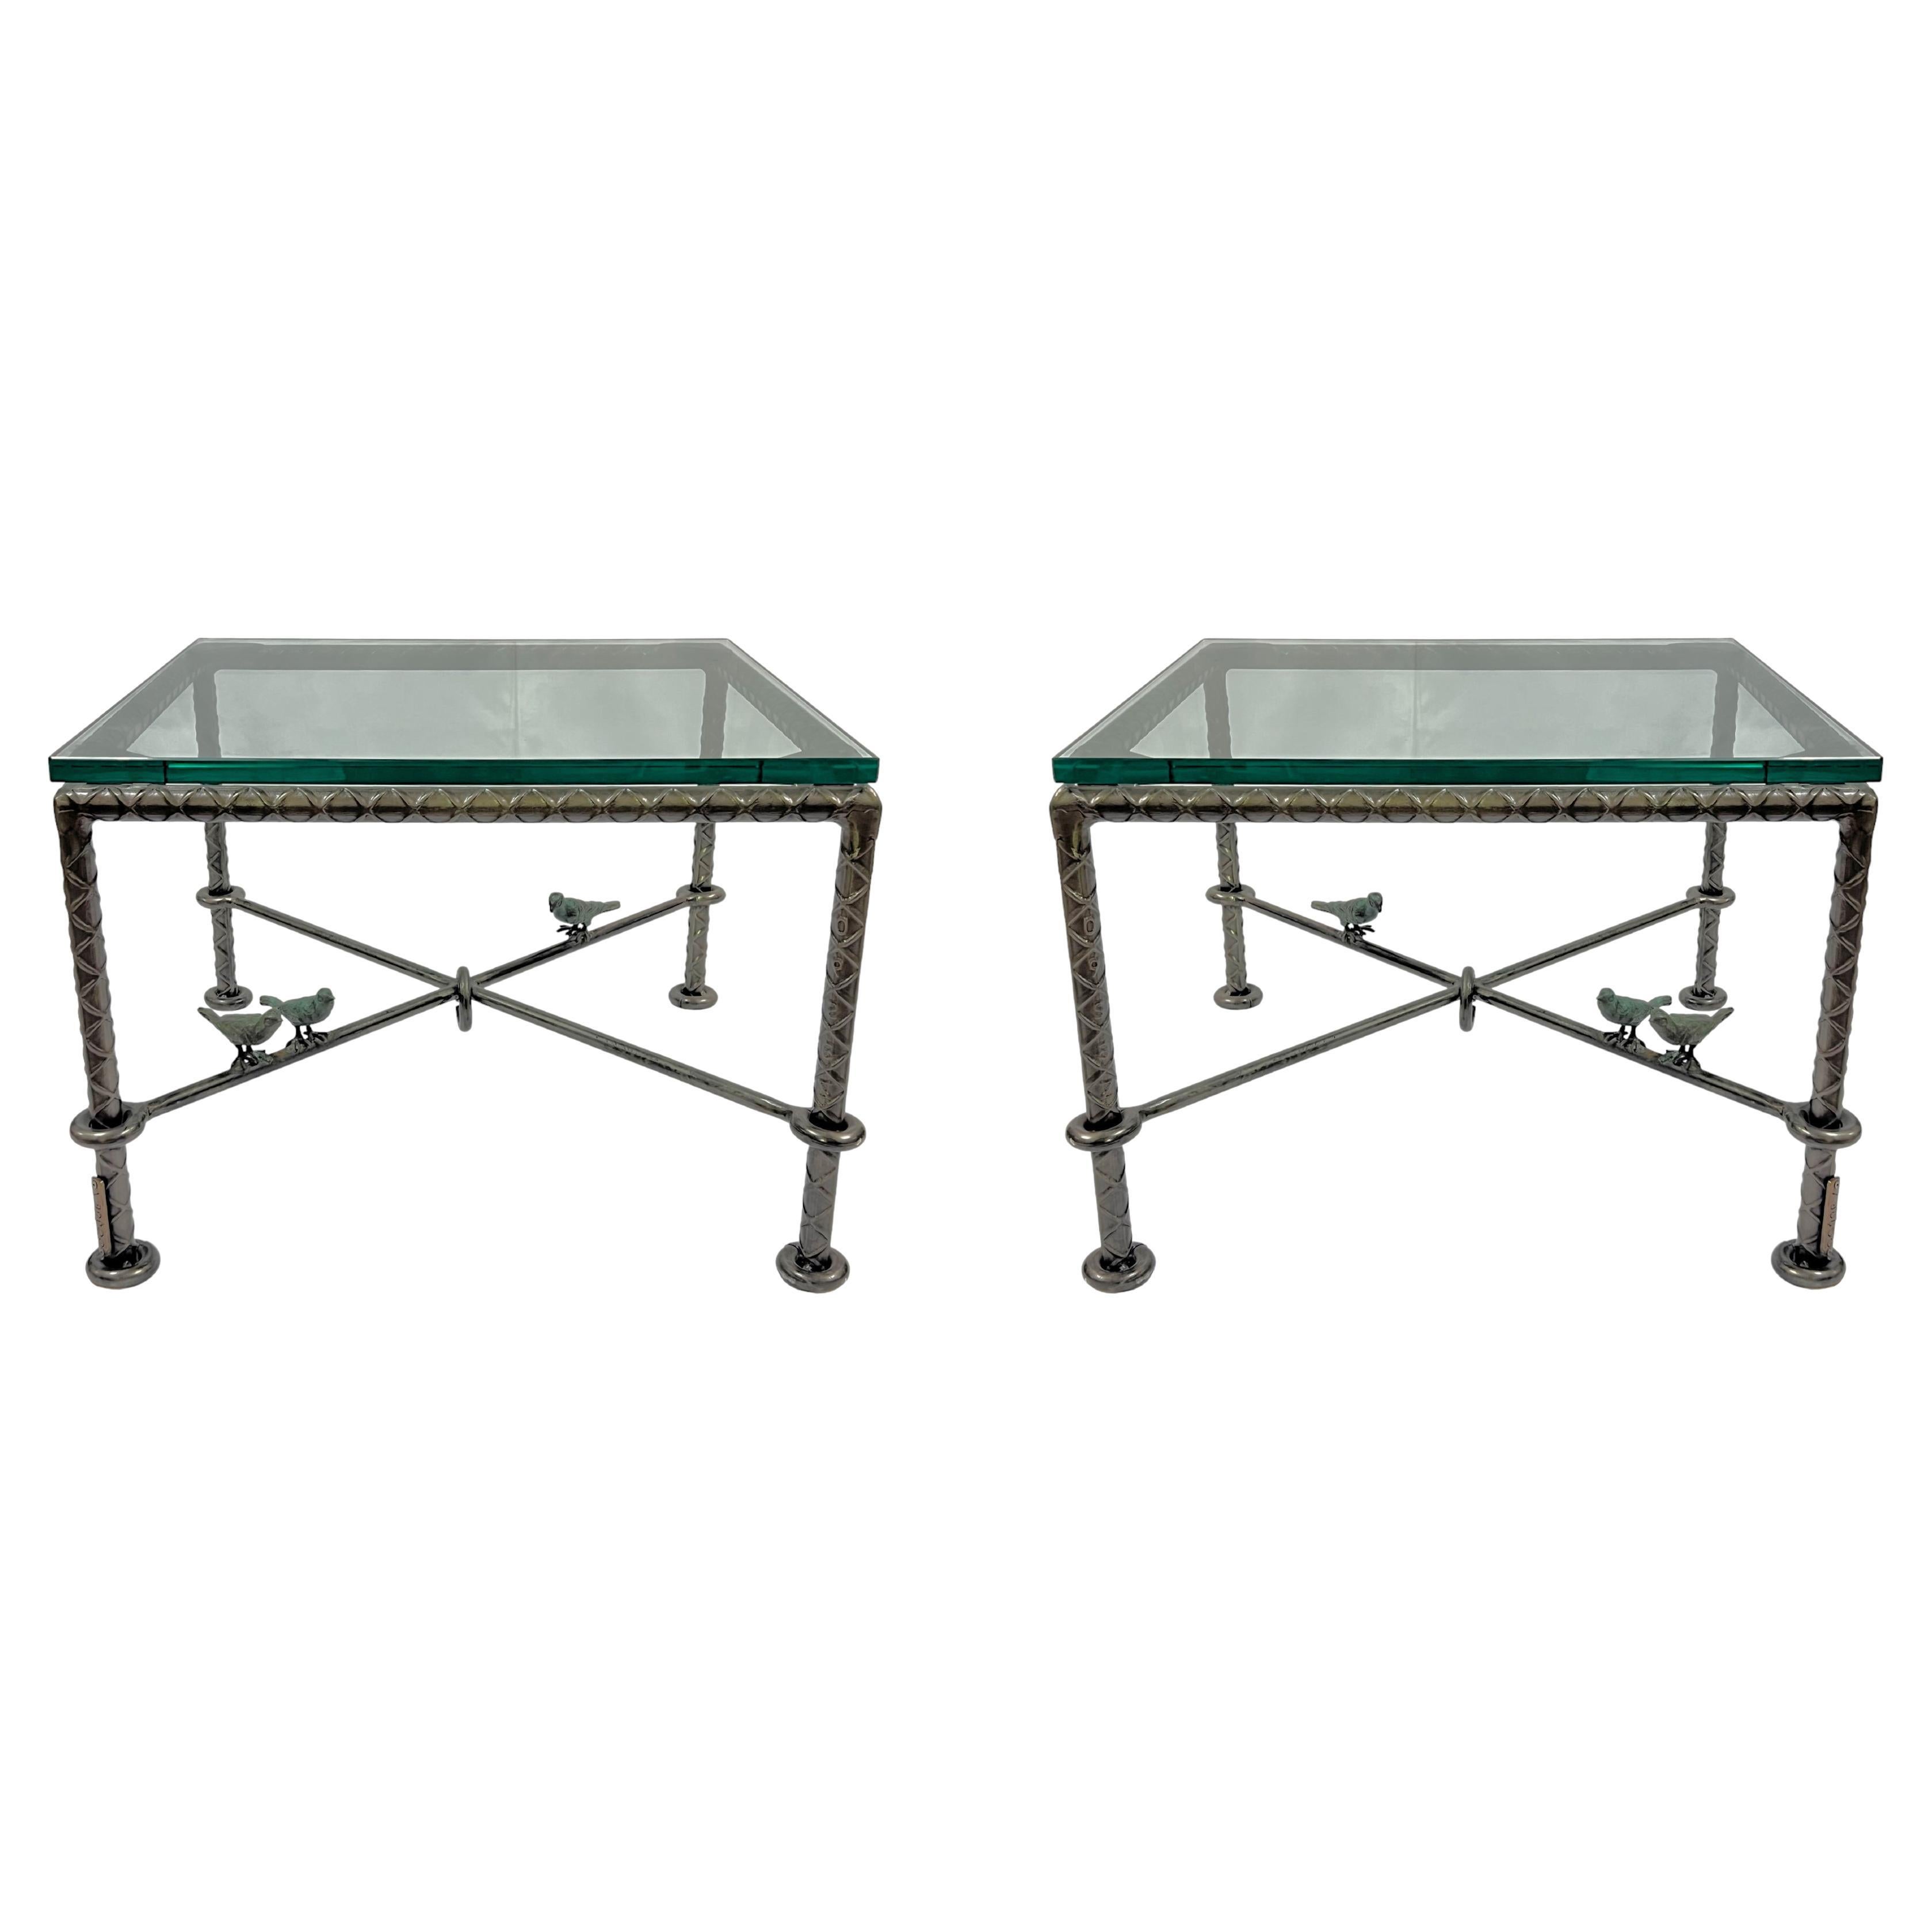 Pair Steel and Glass Cocktail Tables by Ilana Goor, circa 1985 For Sale